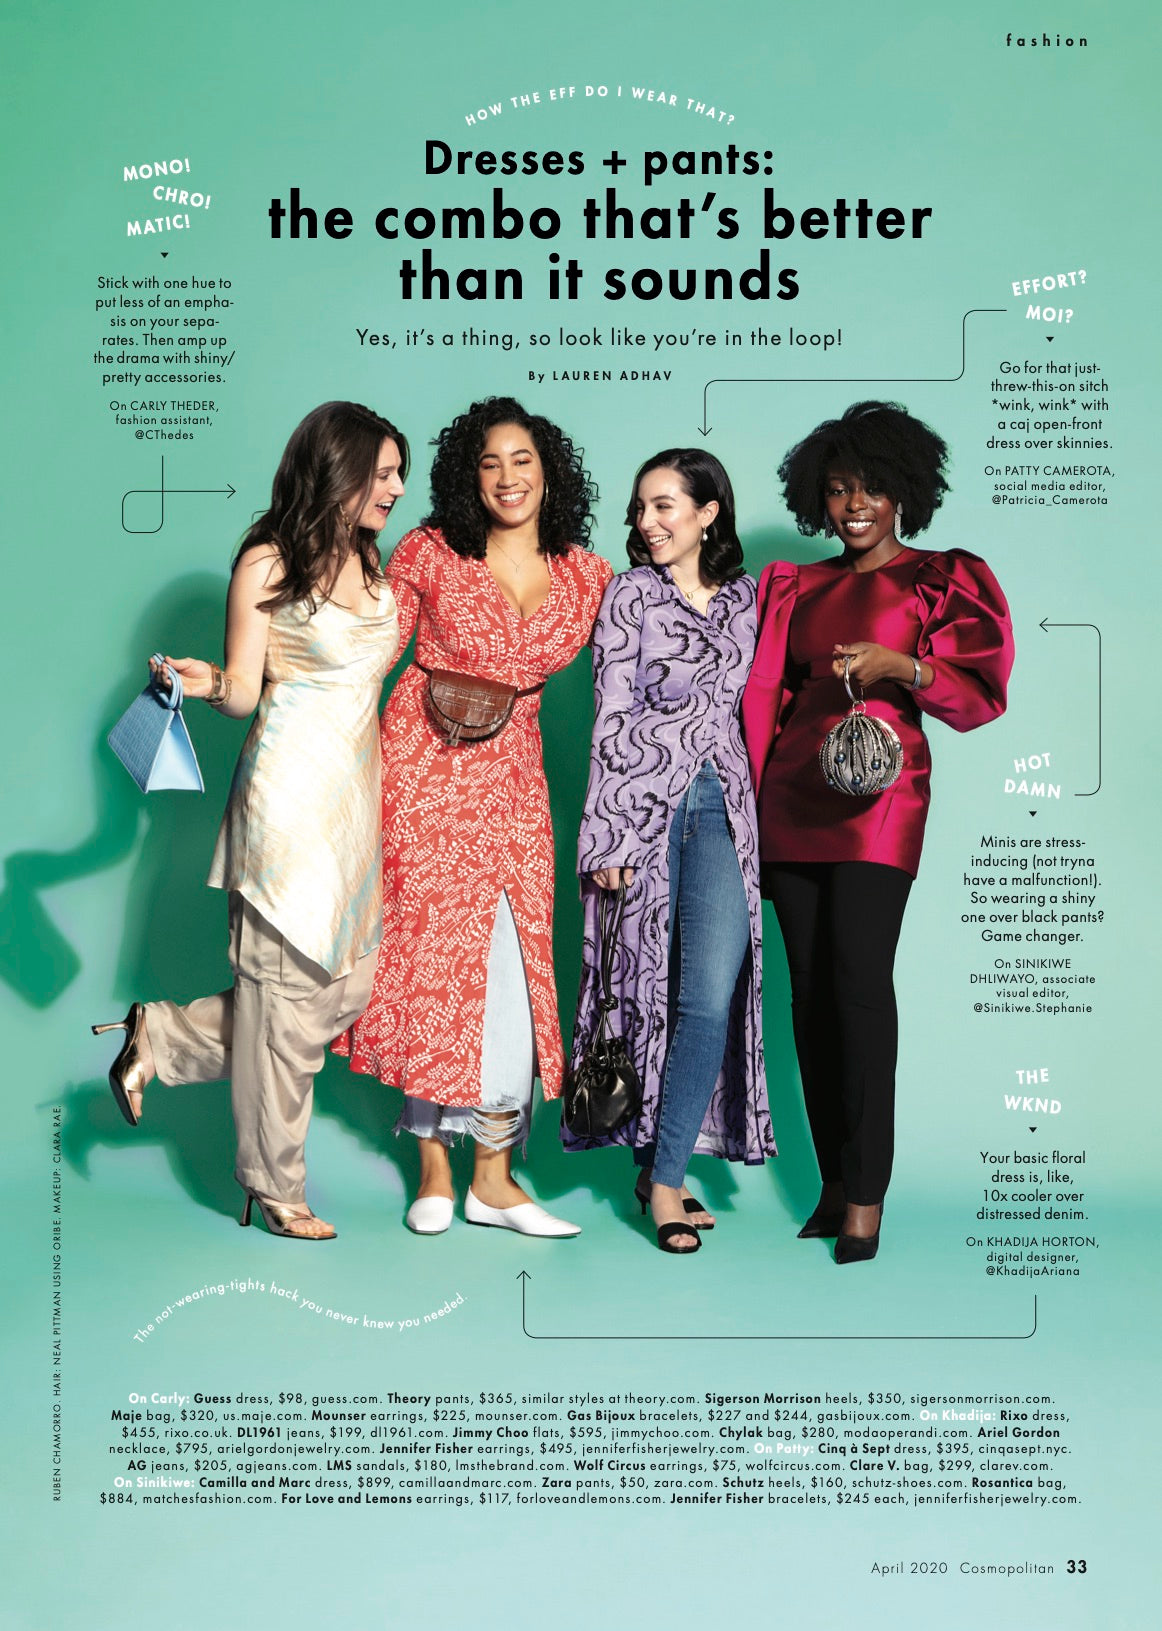 Page 33 of Cosmopolitan's April 2020 Issue - Dresses and Pants: The Combo That's Better Than It Sounds, Featuring Our Black Petit Henri